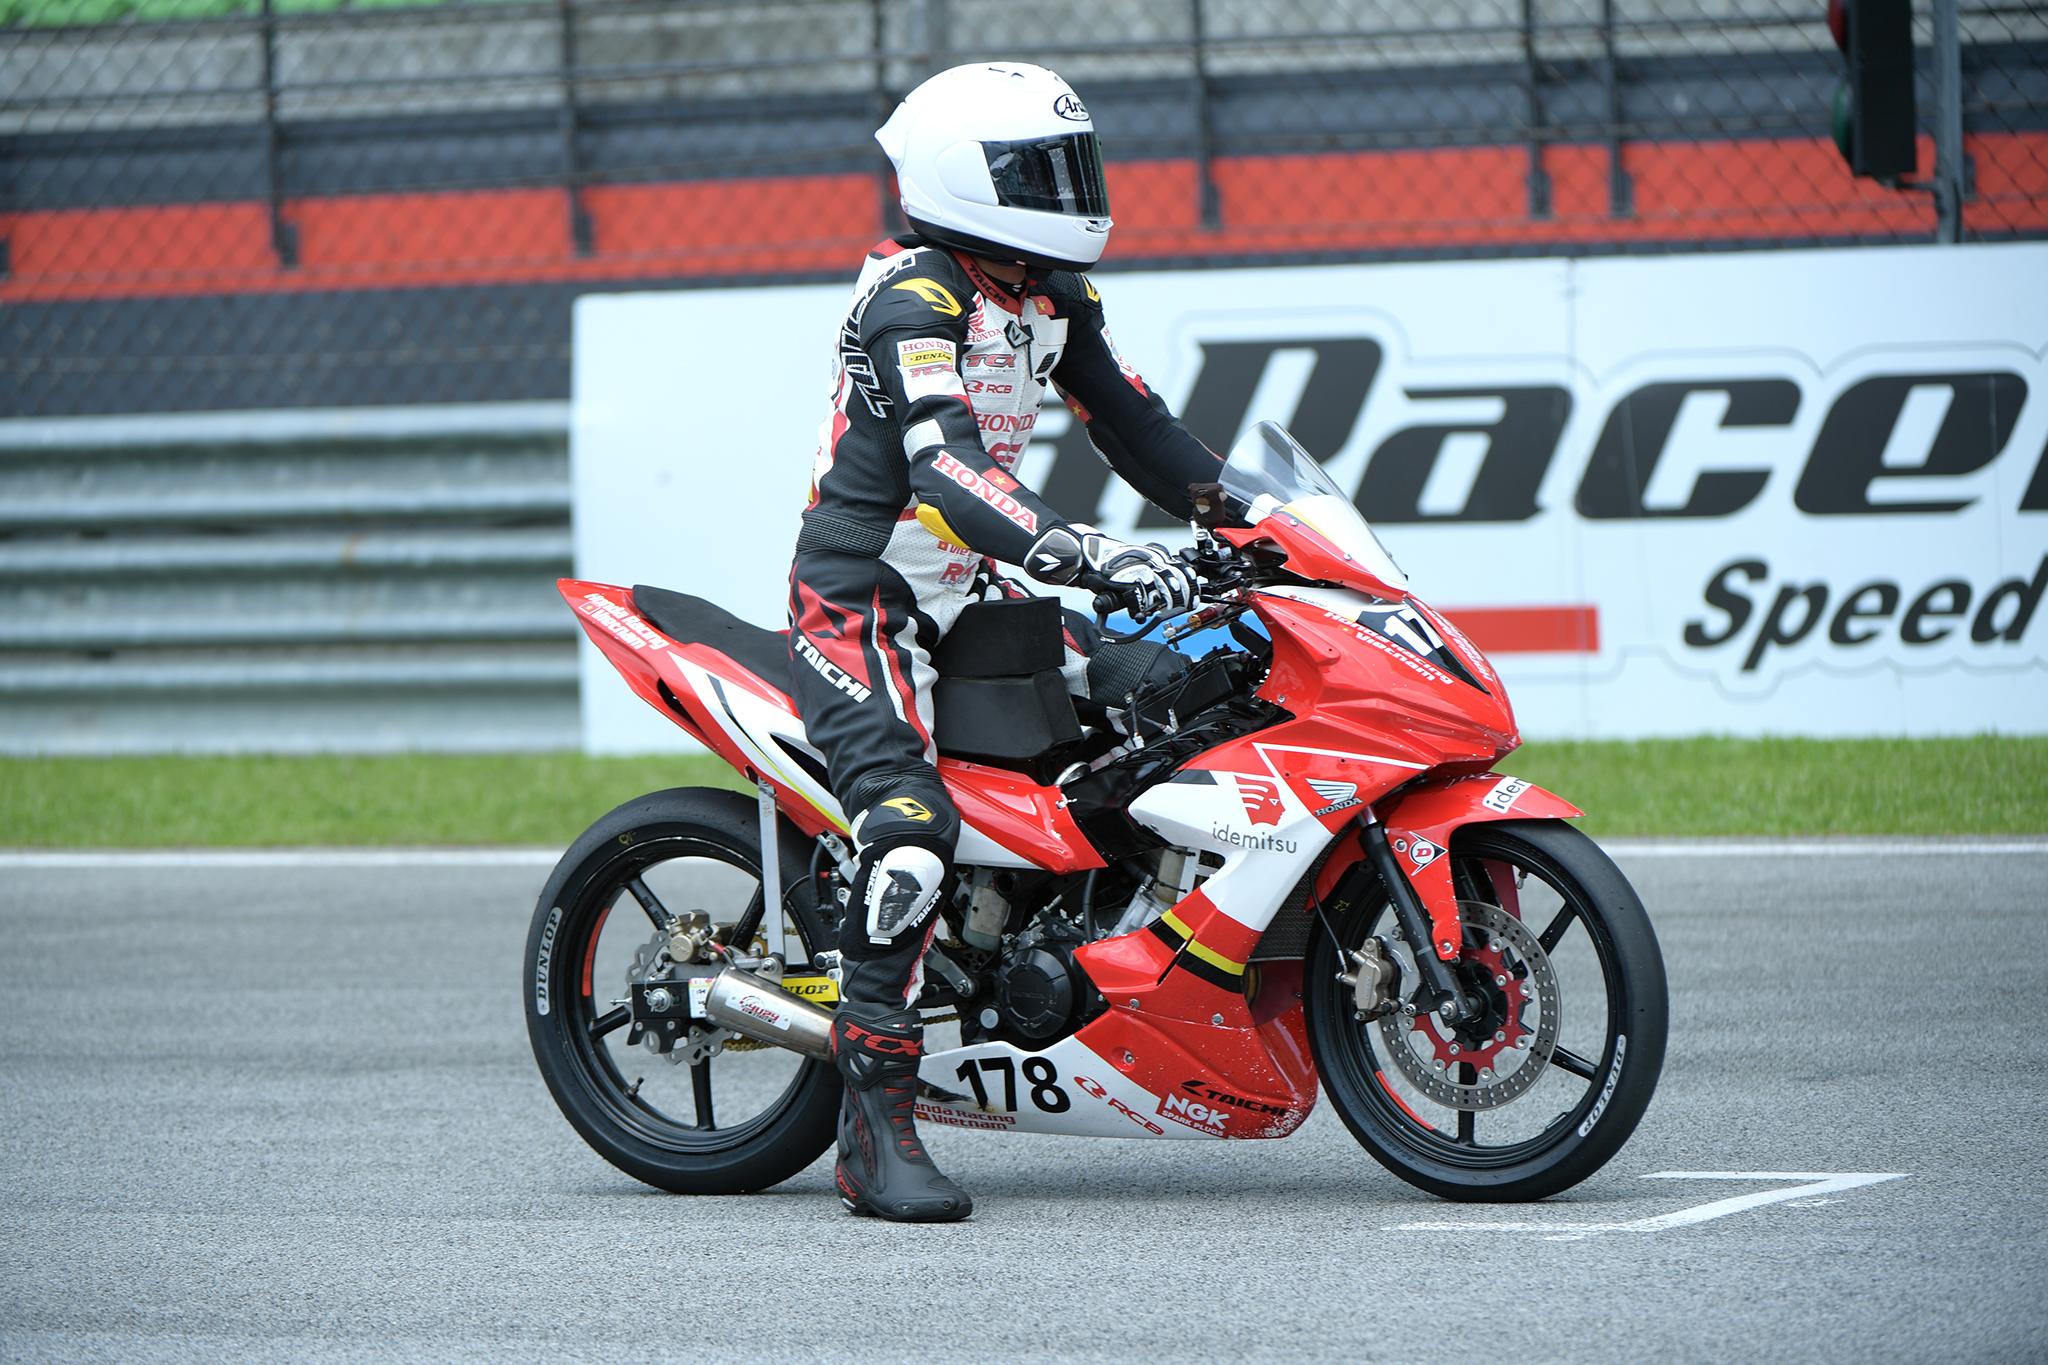 Nguyễn Anh Tuấn surprised with a top 10 finish in Race 1 of Stage 2 ARRC 2023 - dsc-9780.jpg